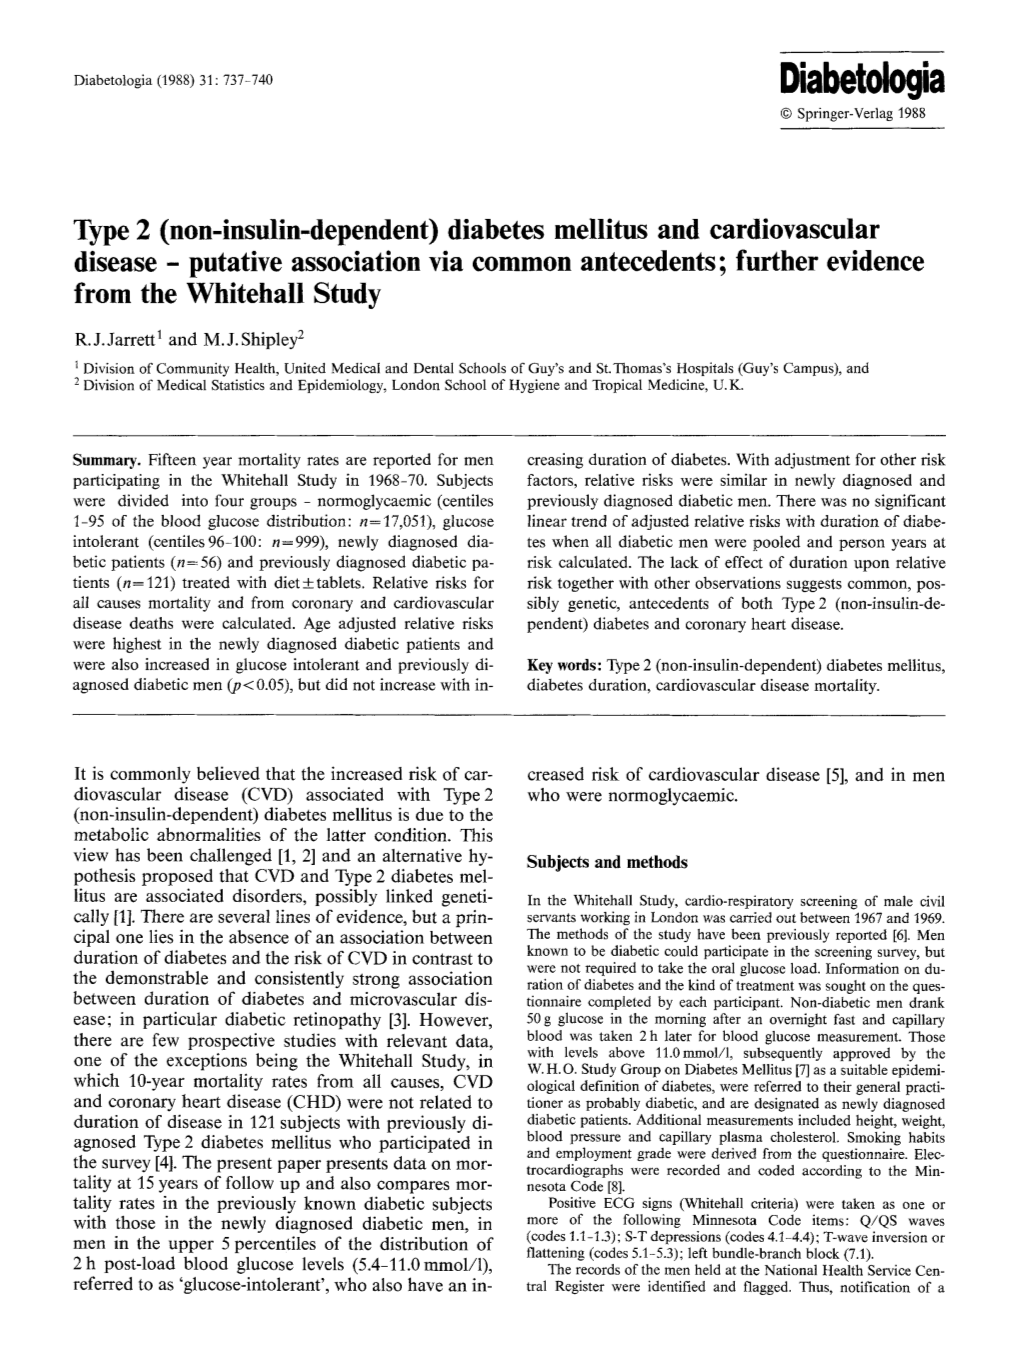 (Non-Insulin-Dependent) Diabetes Mellitus and Cardiovascular Disease - Putative Association Via Common Antecedents; Further Evidence from the Whitehall Study